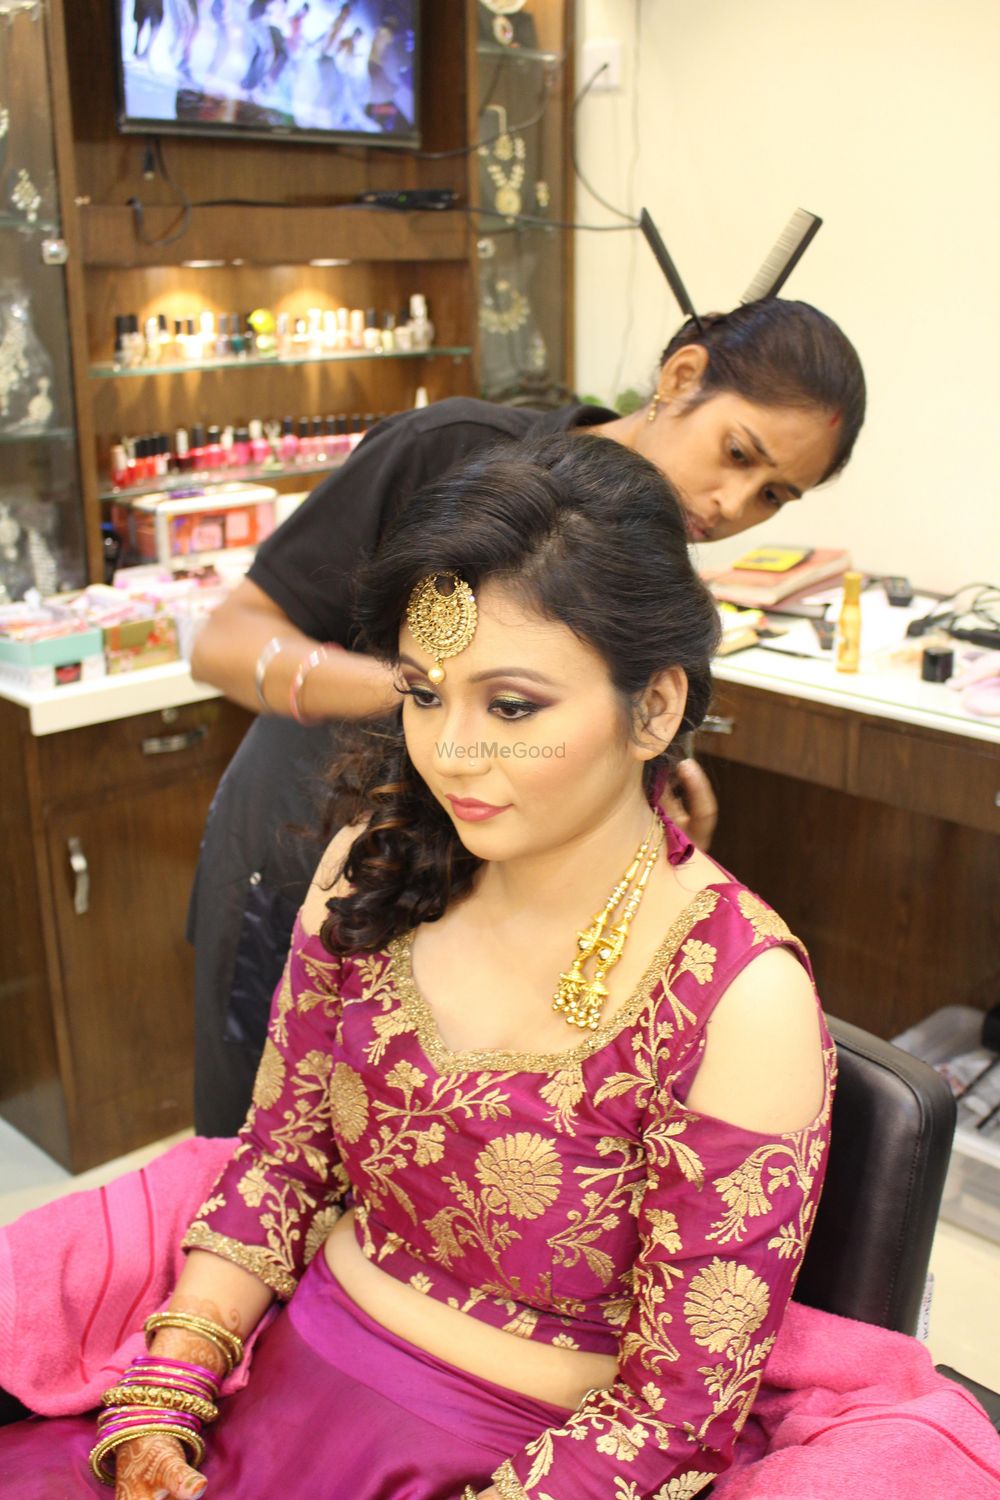 Photo From Swati - By Shades Makeup by Shrinkhala